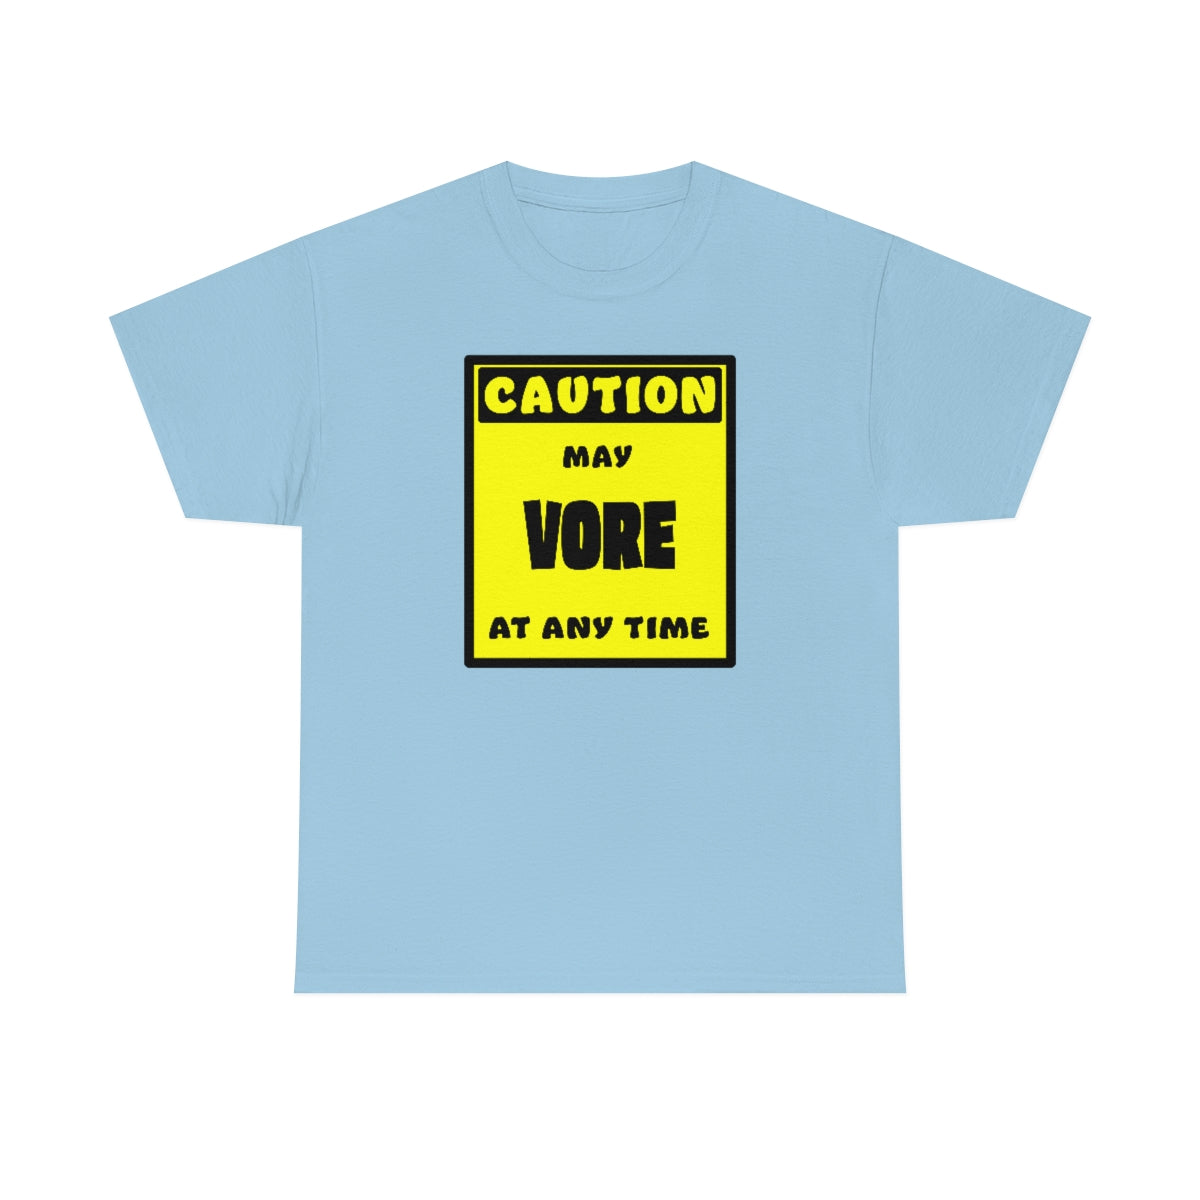 CAUTION! May VORE at any time! - T-Shirt T-Shirt AFLT-Whootorca Light Blue S 